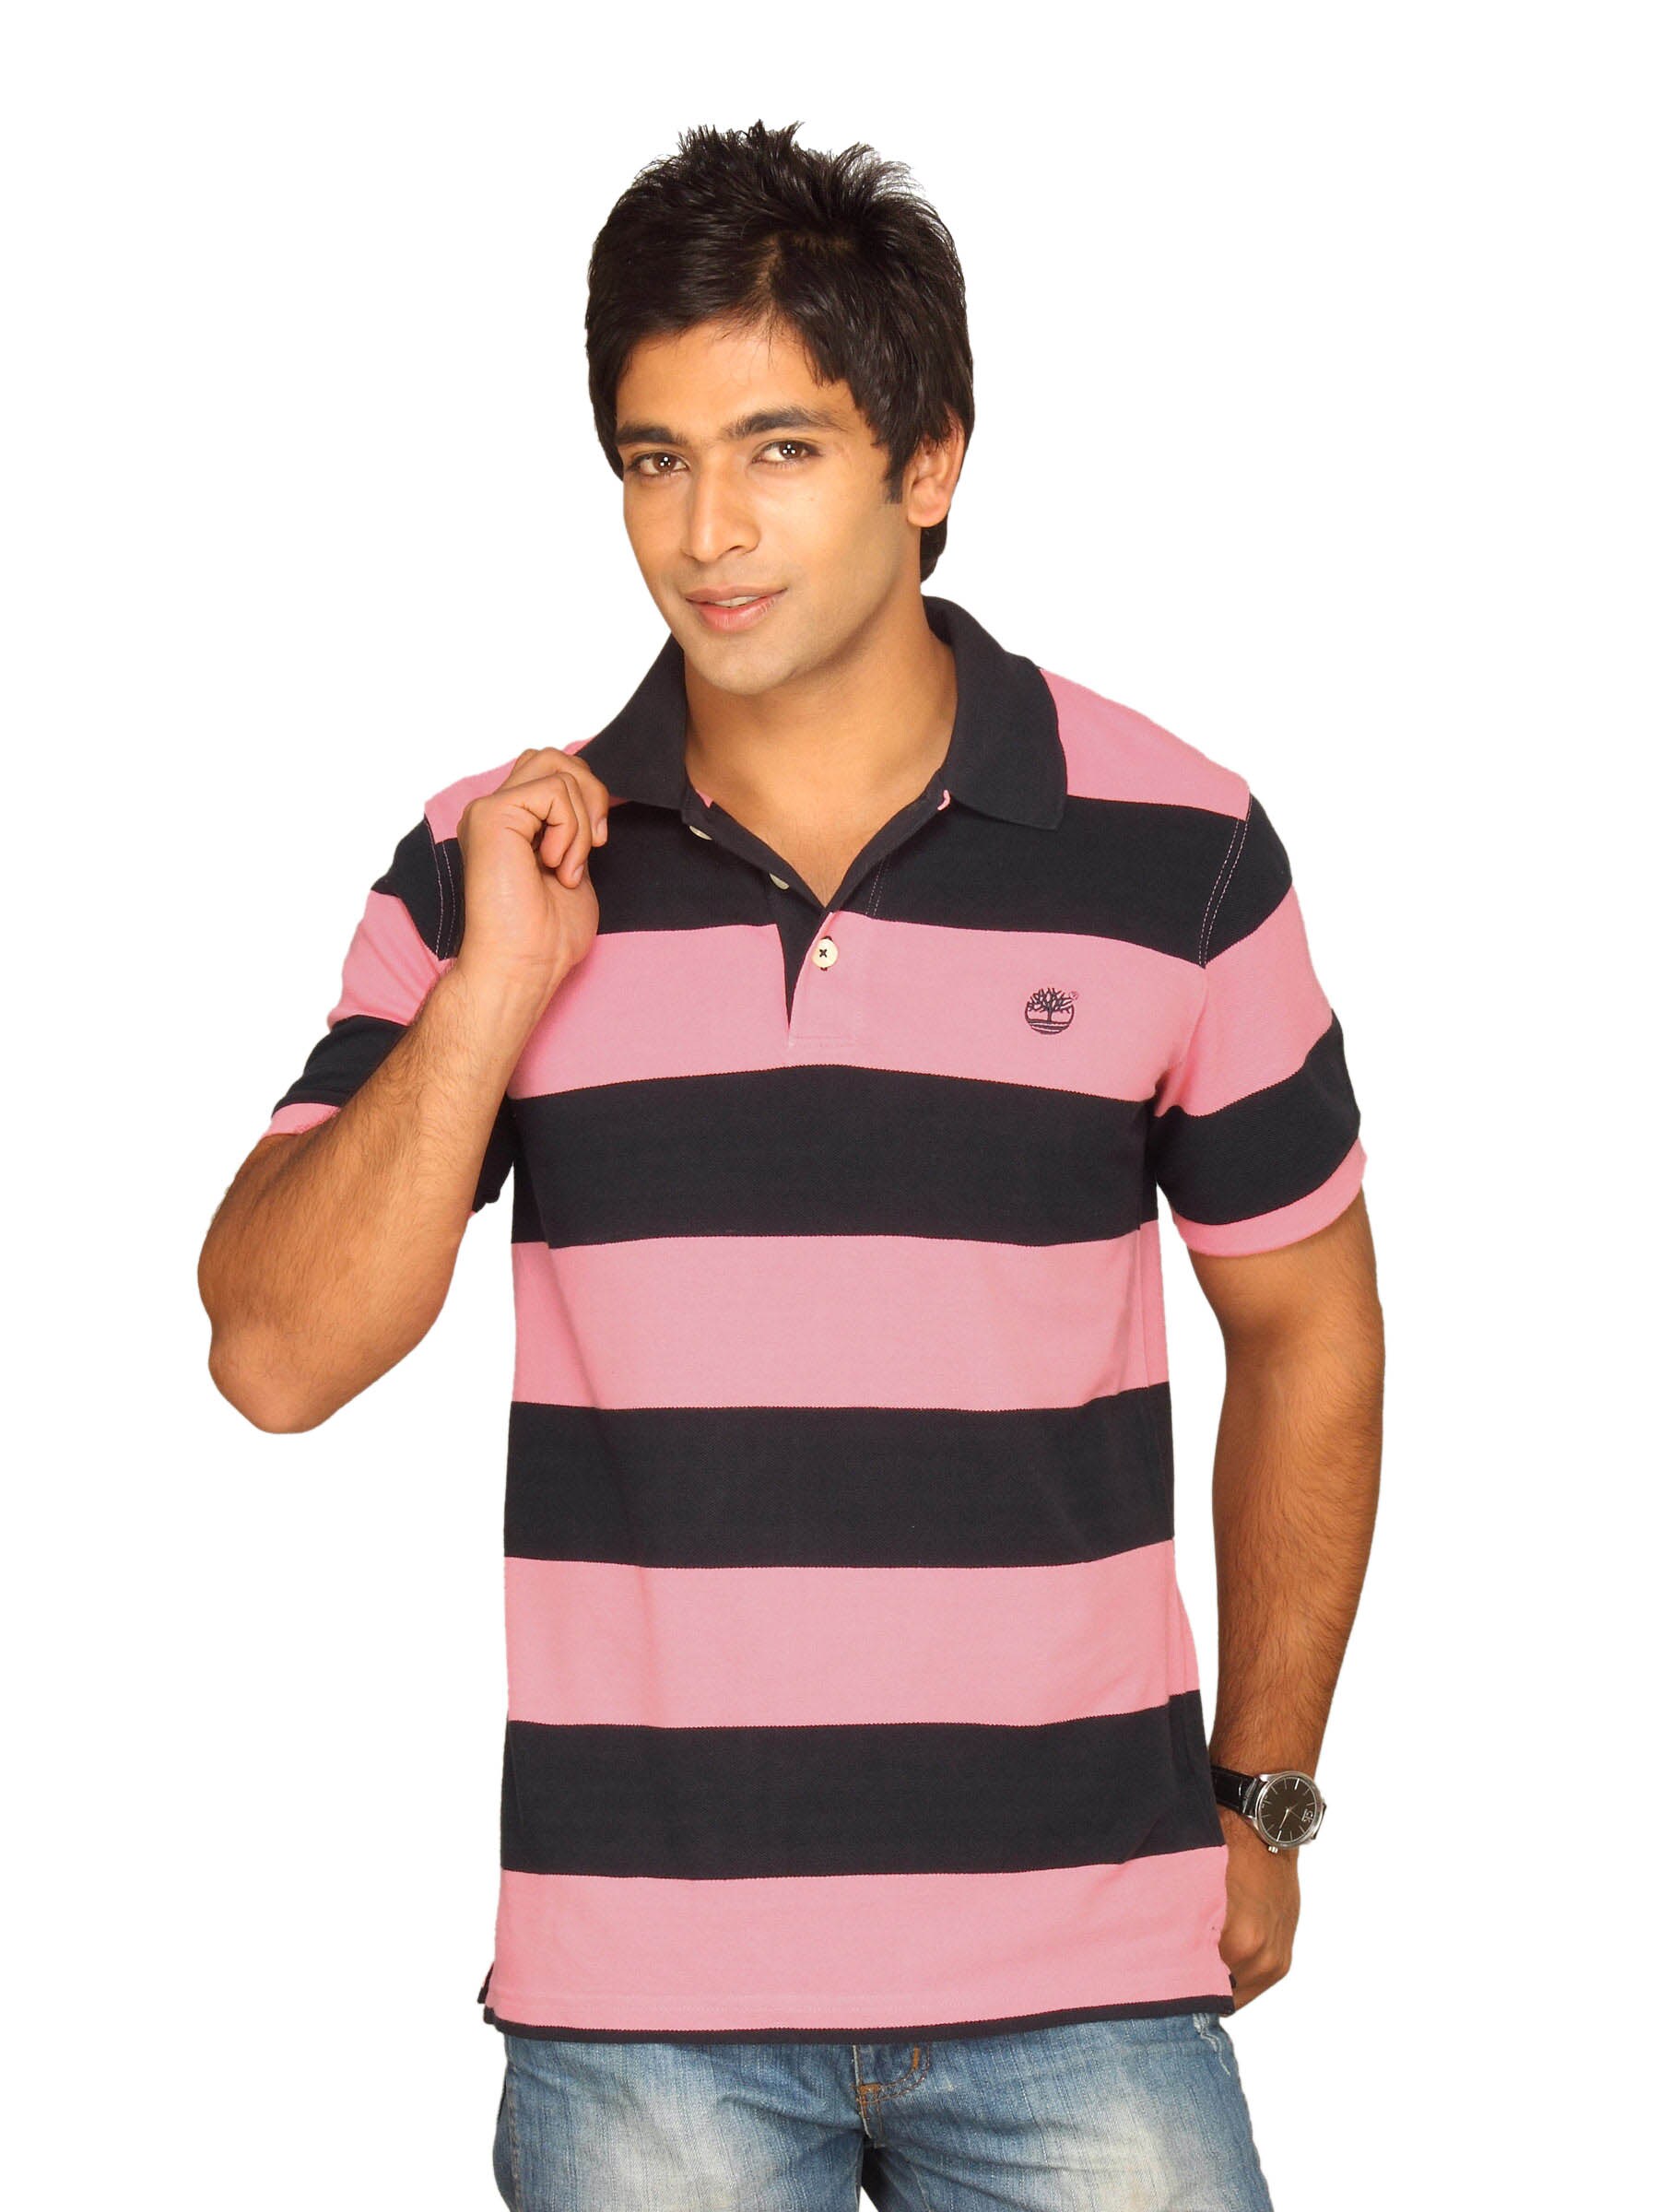 Timberland Men's Rugby Stripe Pique Polo Pink T-shirt